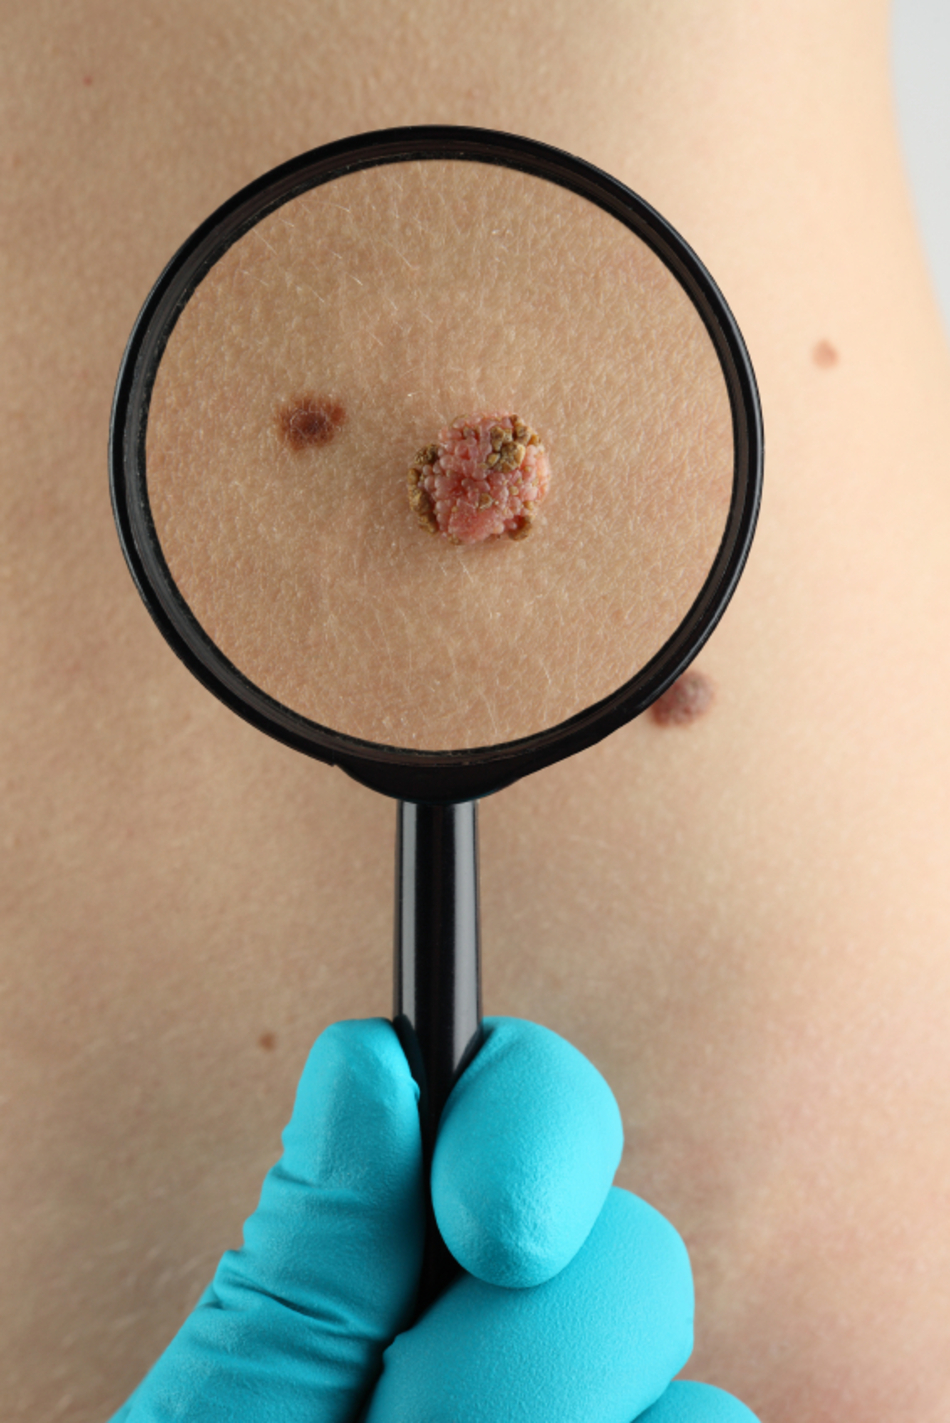 Mapping Moles Is an Effective Way to Fight Skin Cancer